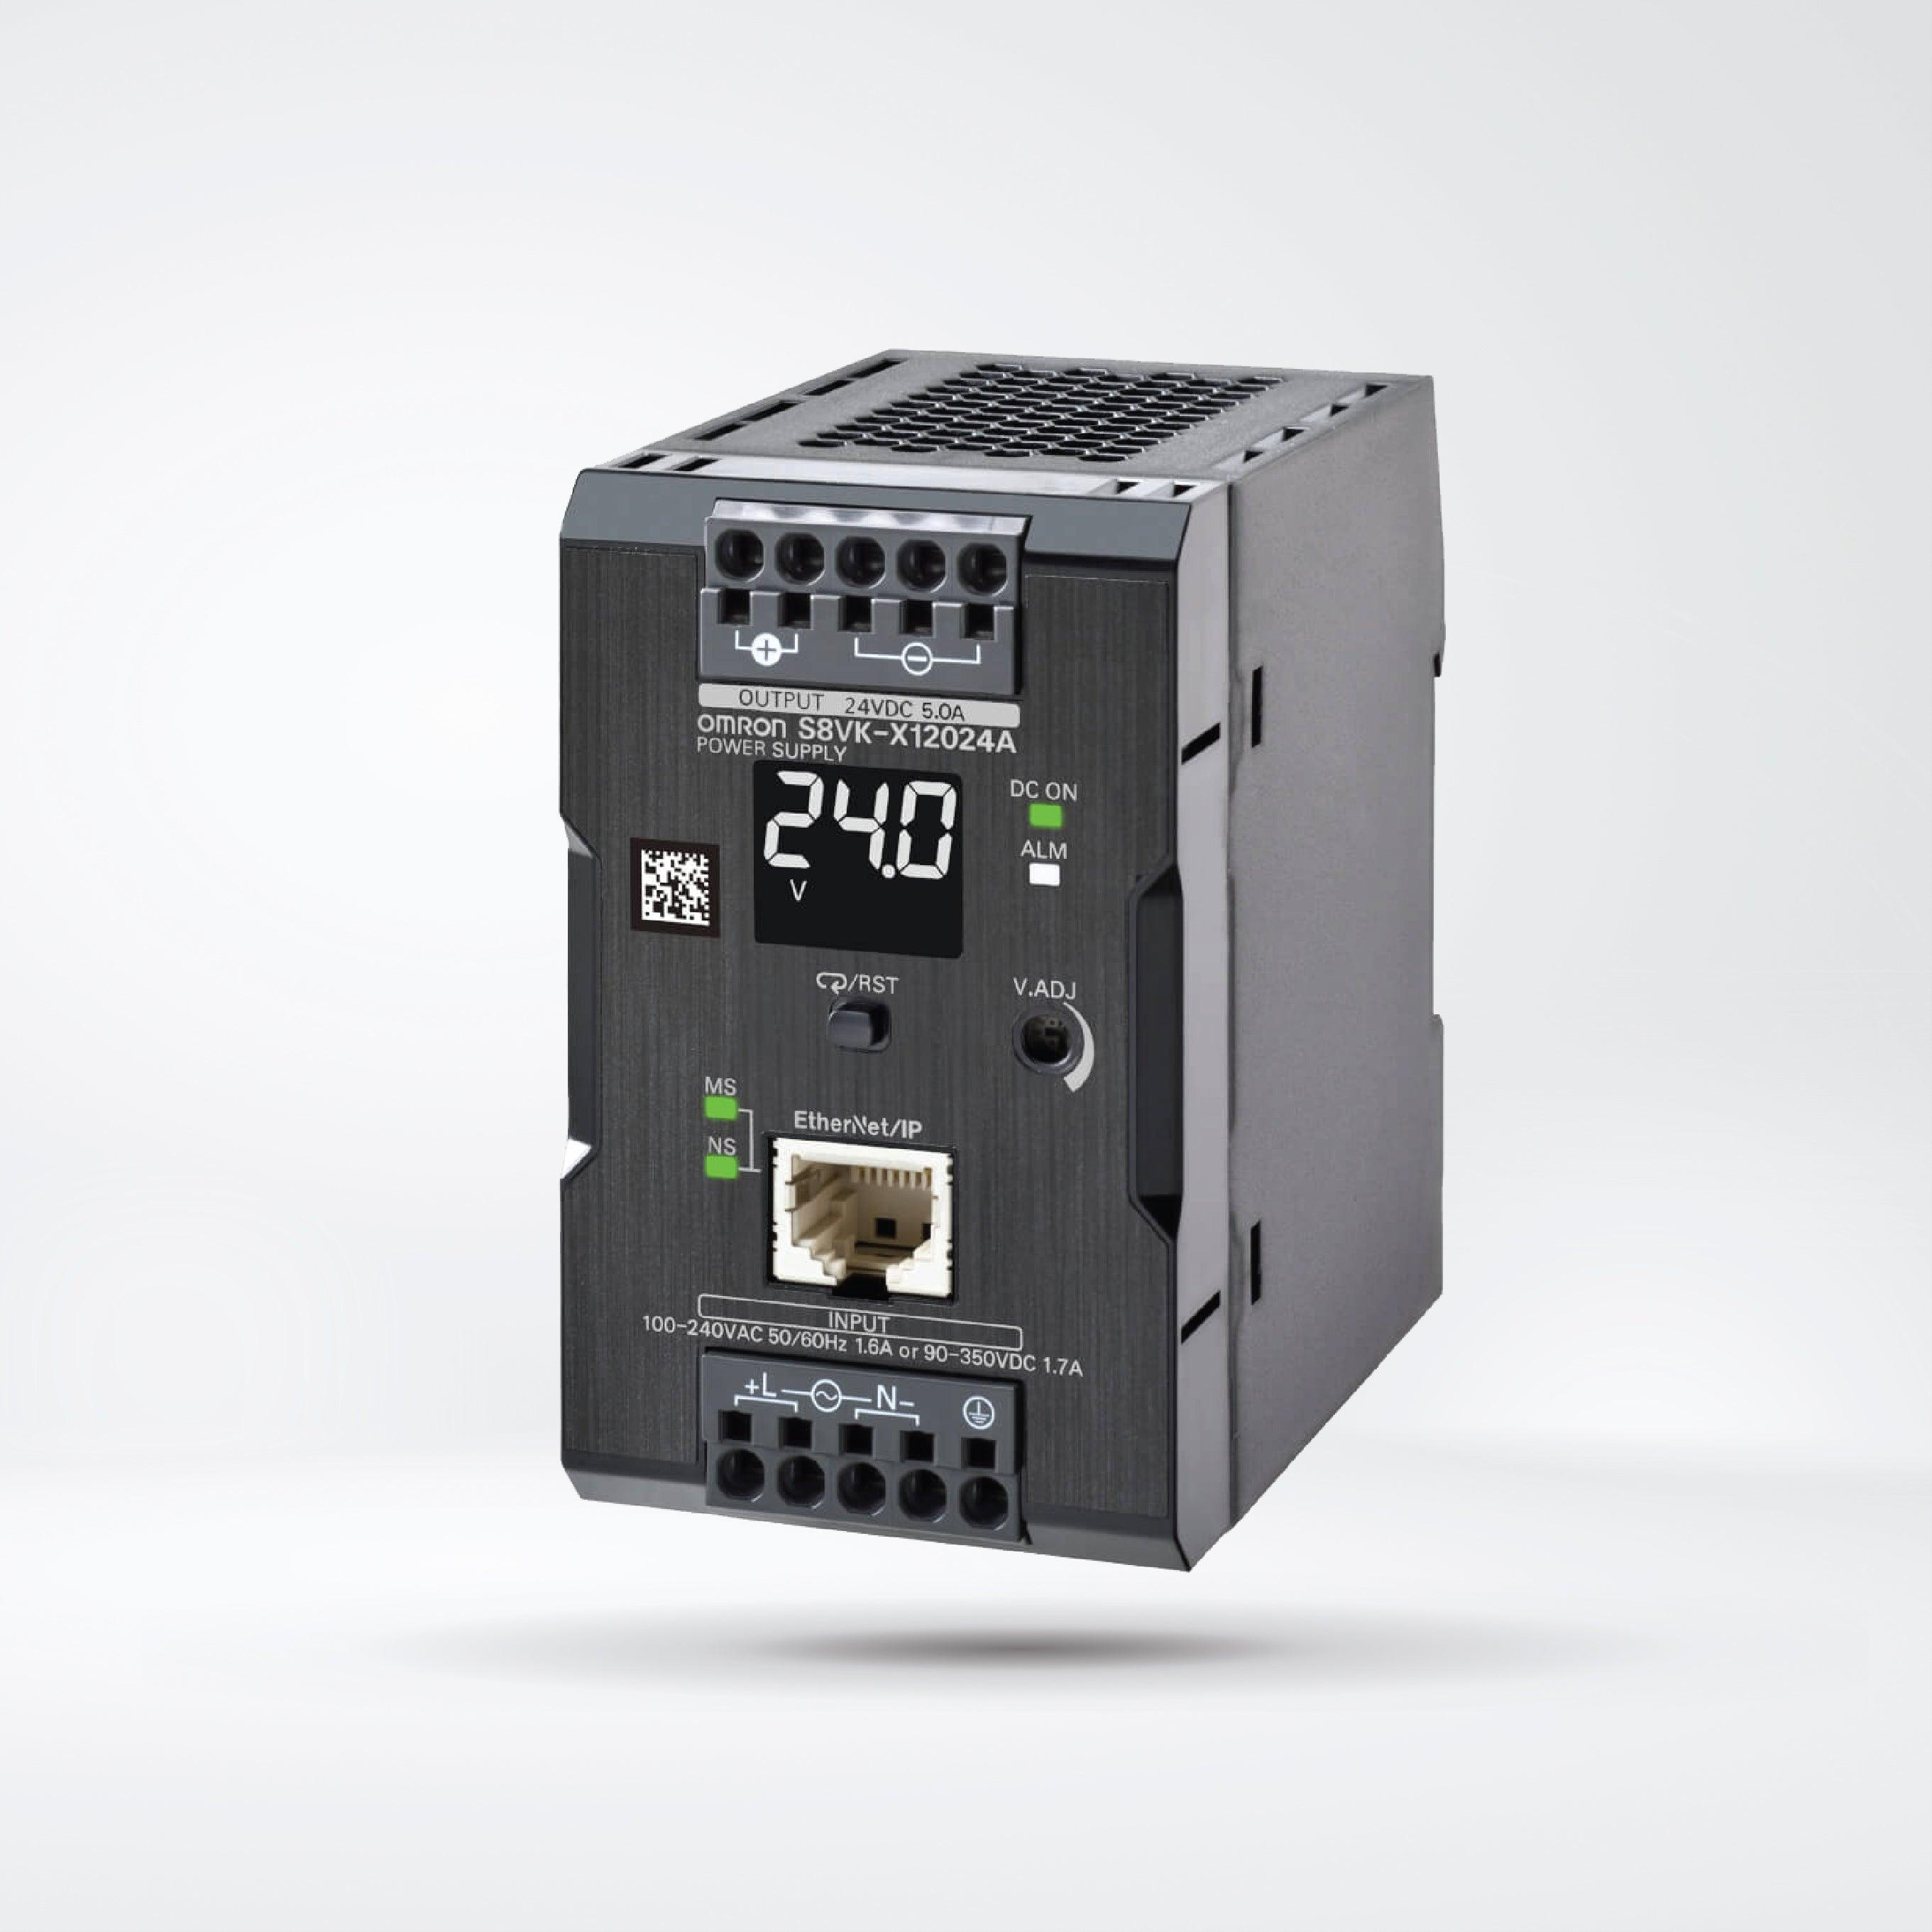 S8VK-X12024A-EIP Switch Mode Power Supply, with EtherNet/IP, Modbus TCP,120 W, 24 VDC, display - Riverplus